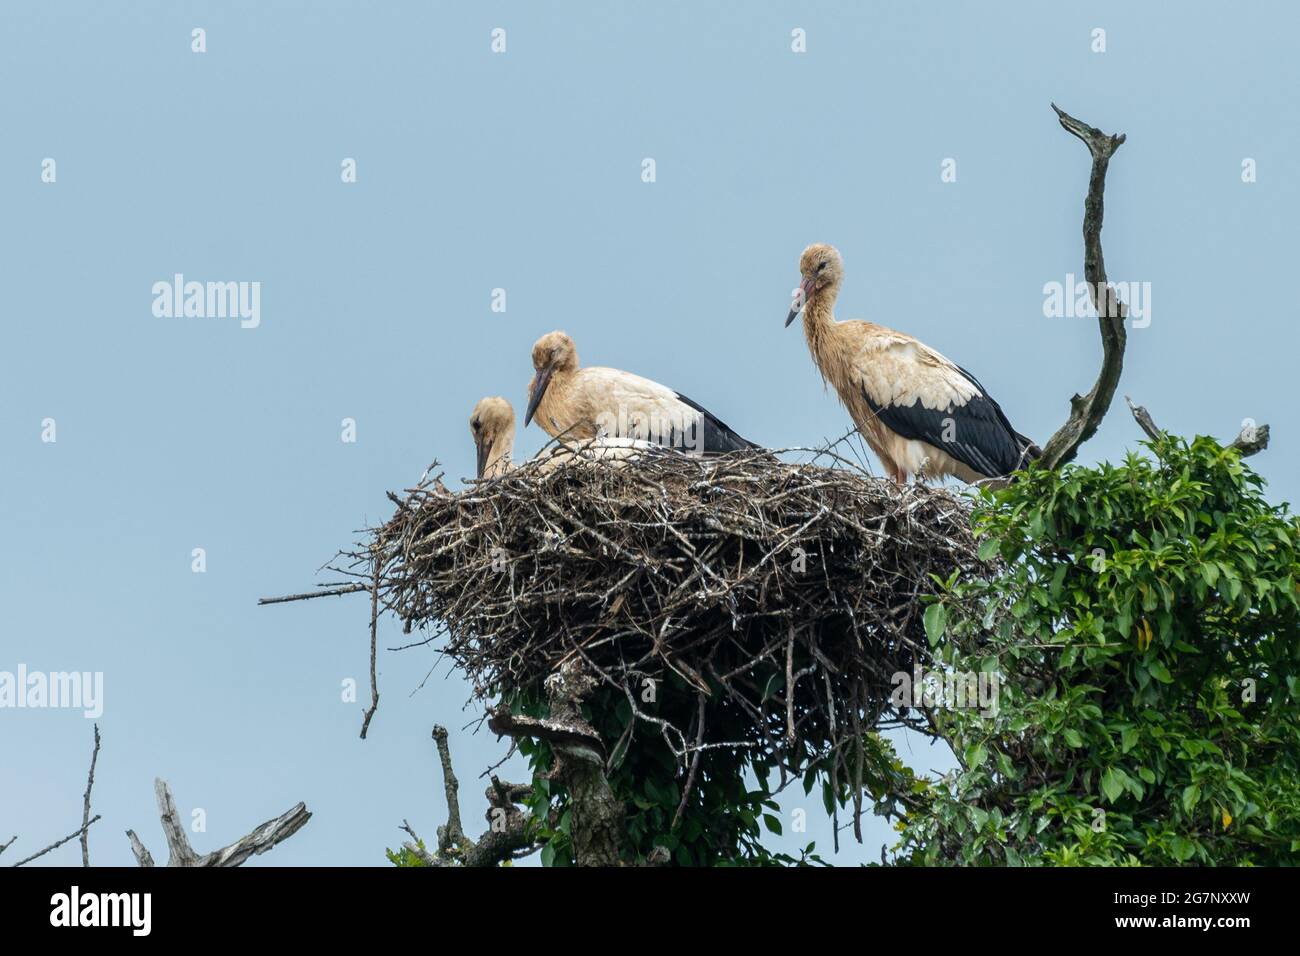 White stork nest with chicks at Knepp Estate Wildland. The storks are part of a successful reintroduction project at the pioneering rewilding site, UK Stock Photo